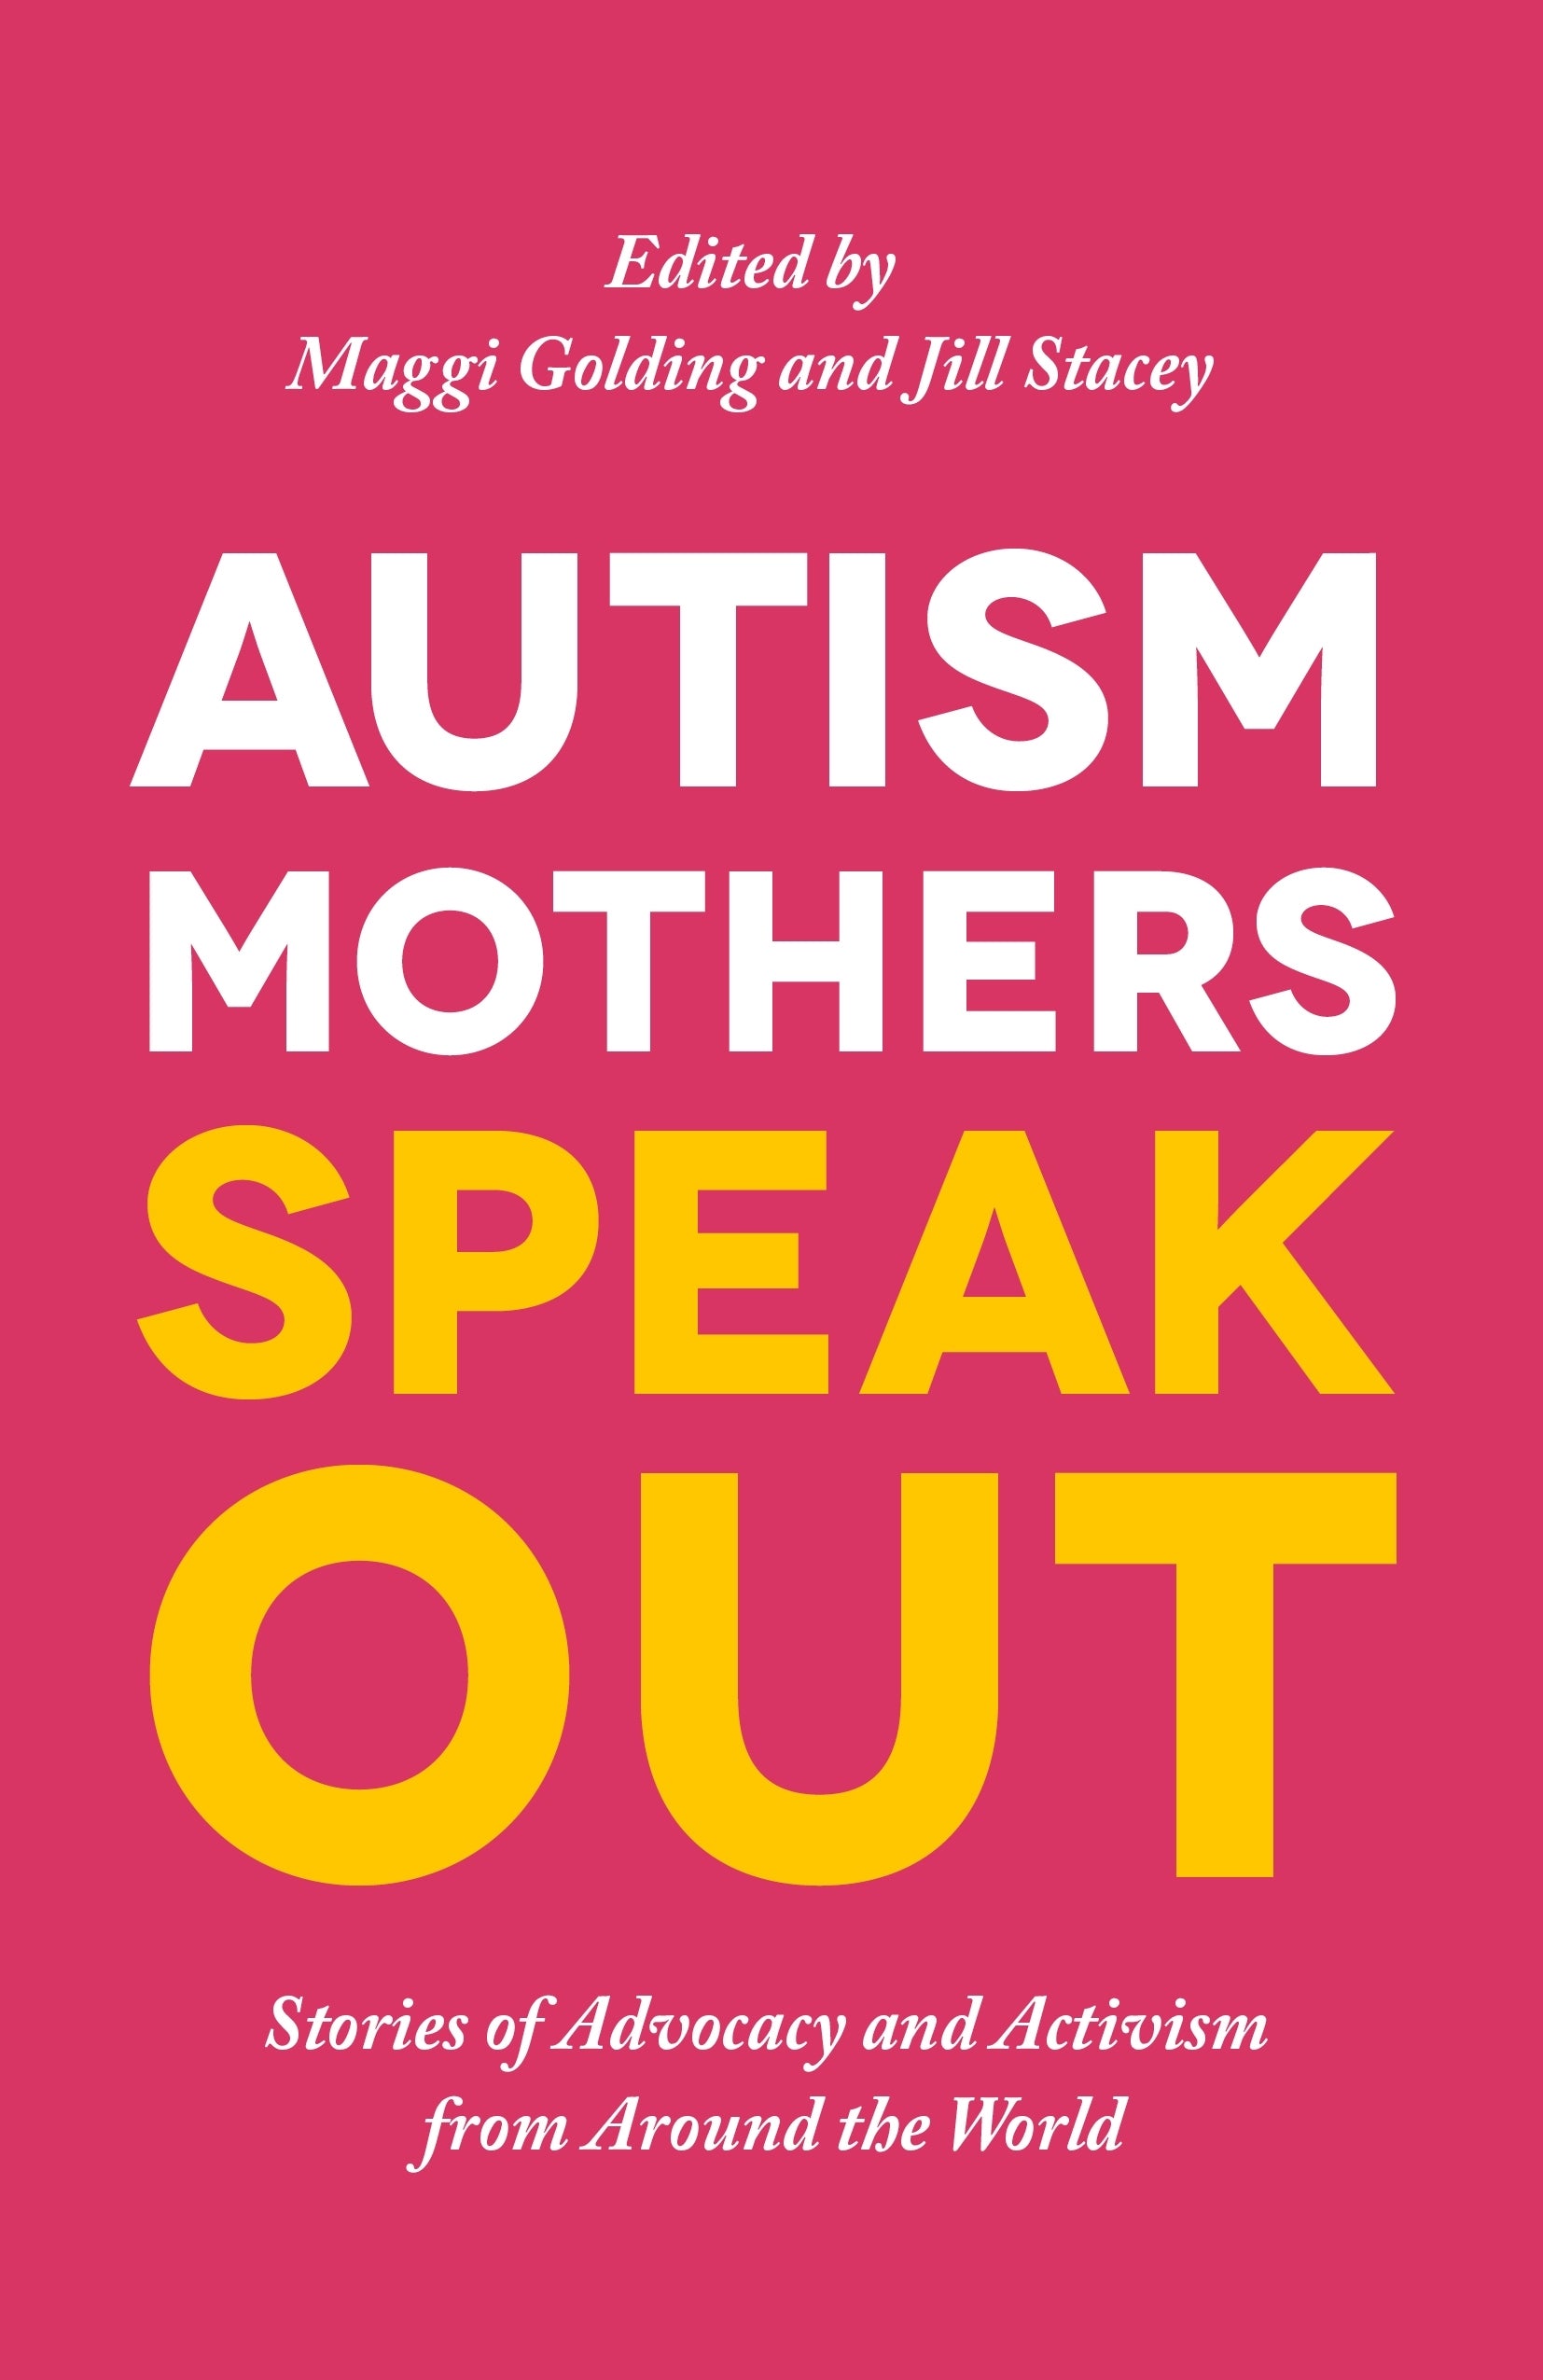 Autism Mothers Speak Out by No Author Listed, Margaret Golding, Jill Stacey